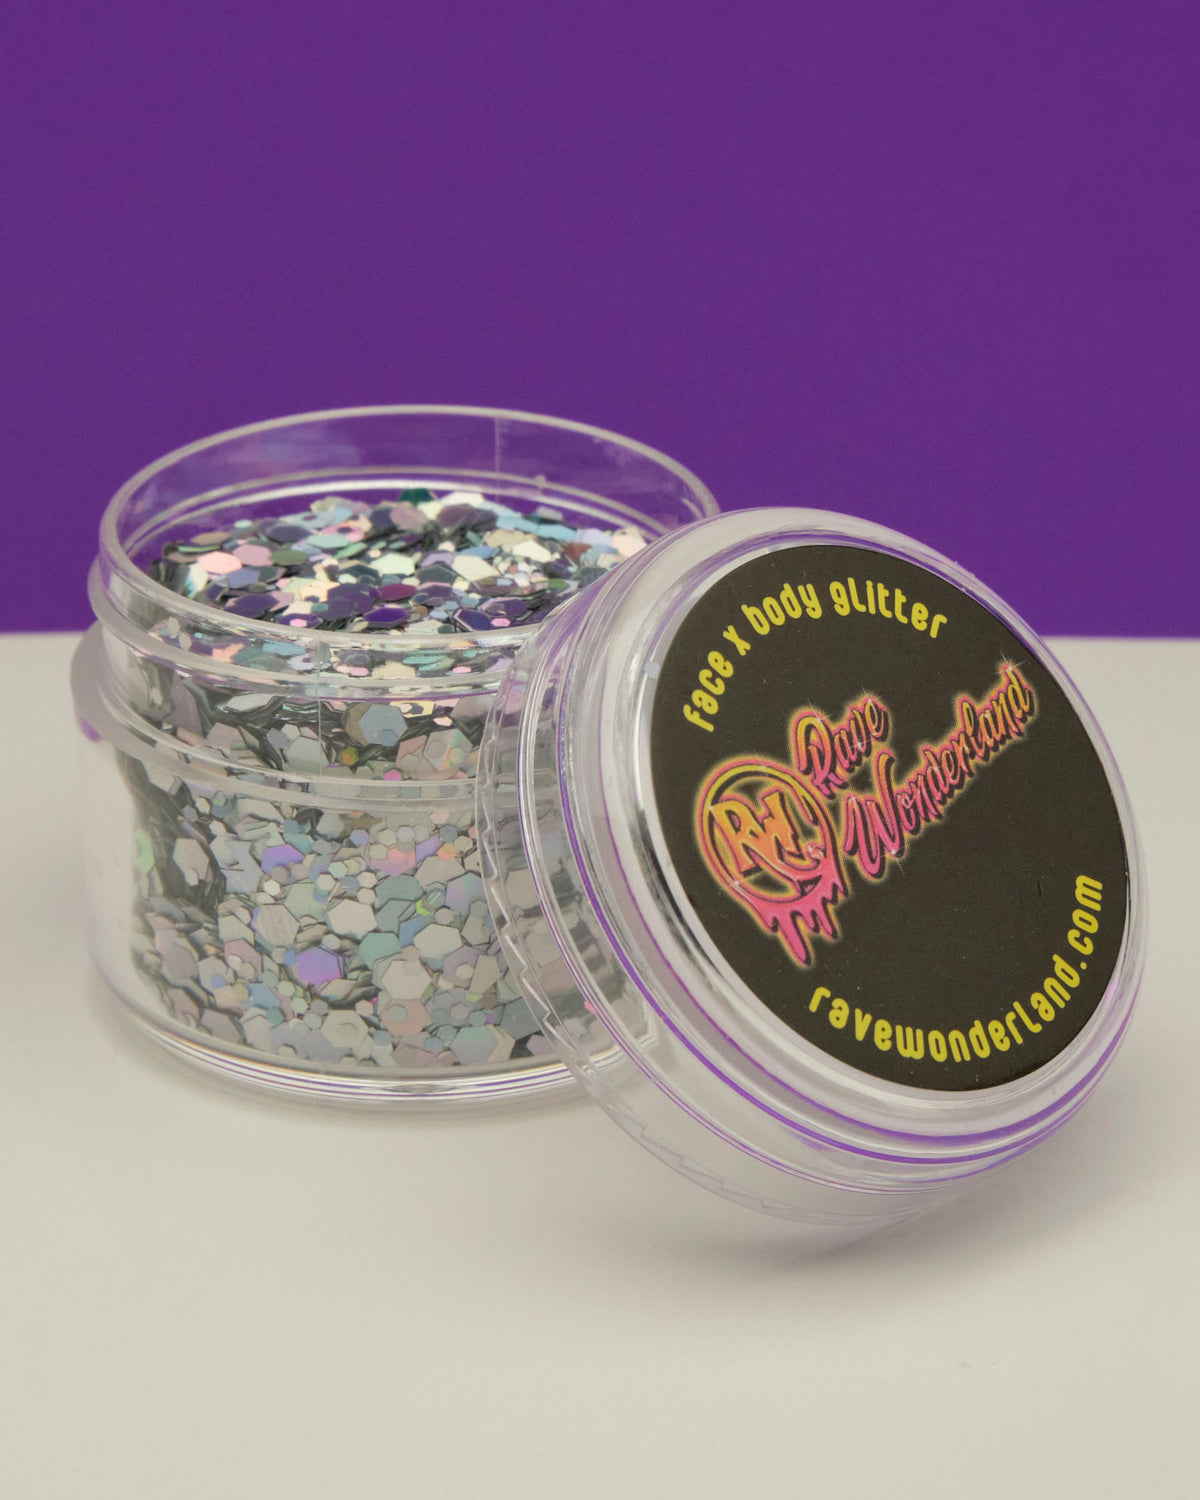 Silver Chunk Body and Face Festival Glitter (20 or 30 Grams) - Rave Wonderland